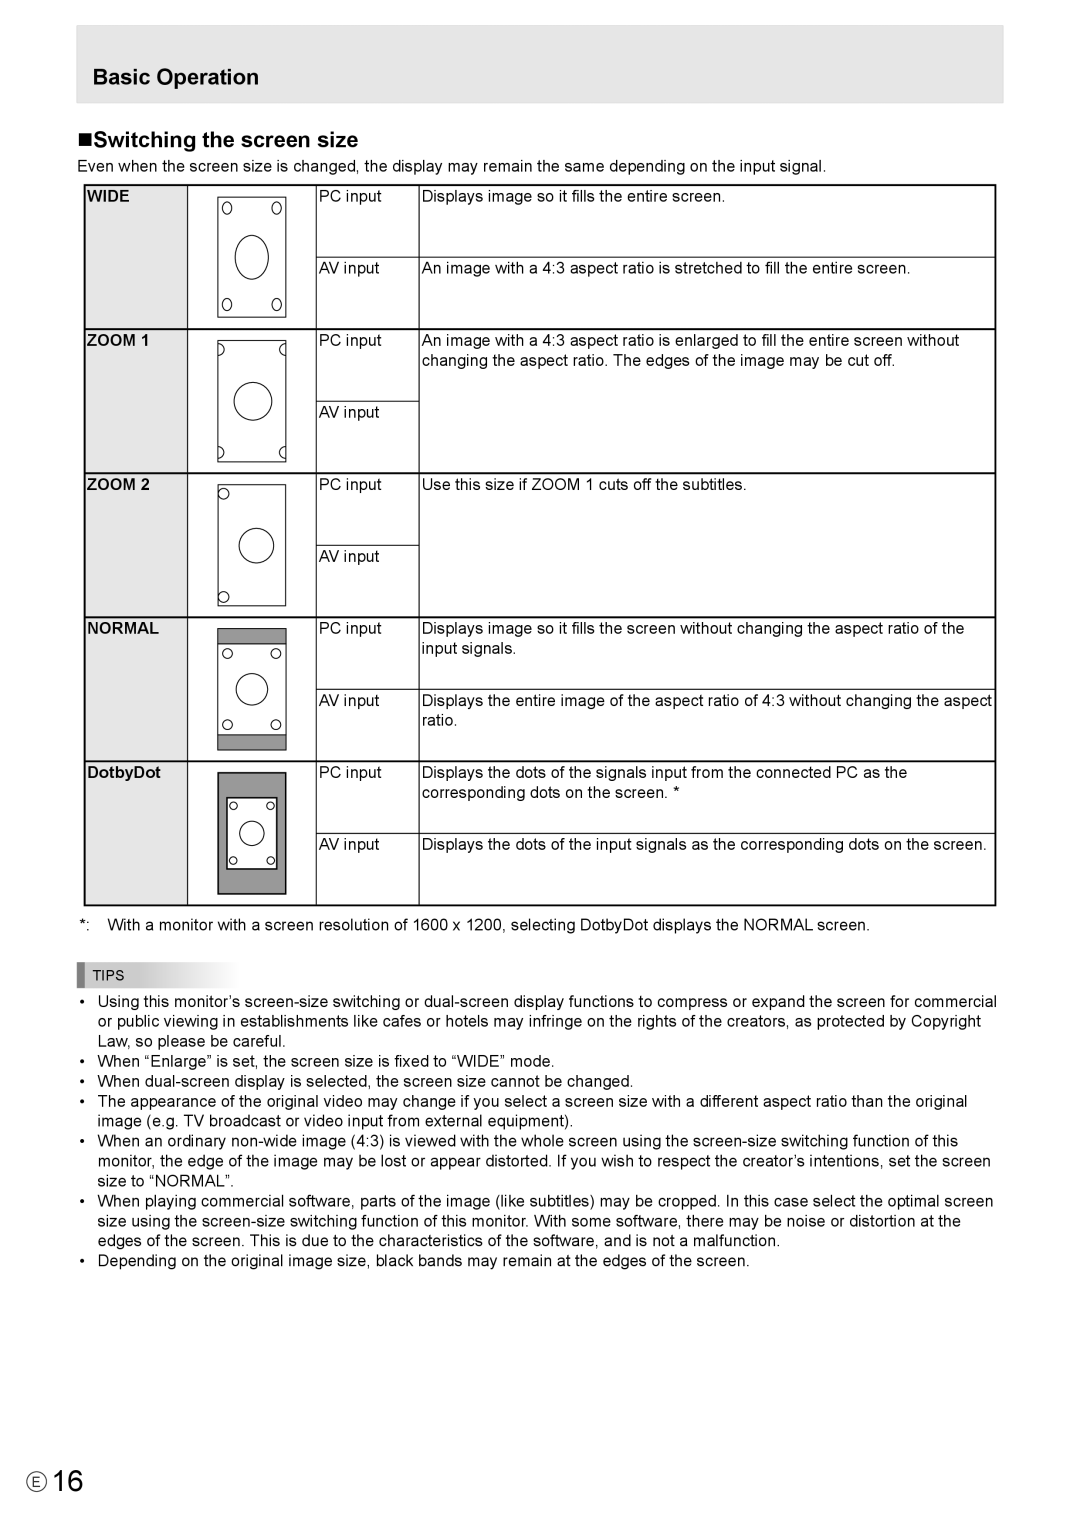 Mitsubishi Electronics LDT651P operation manual Basic Operation nSwitching the screen size, WIDE ZOOM ZOOM NORMAL DotbyDot 